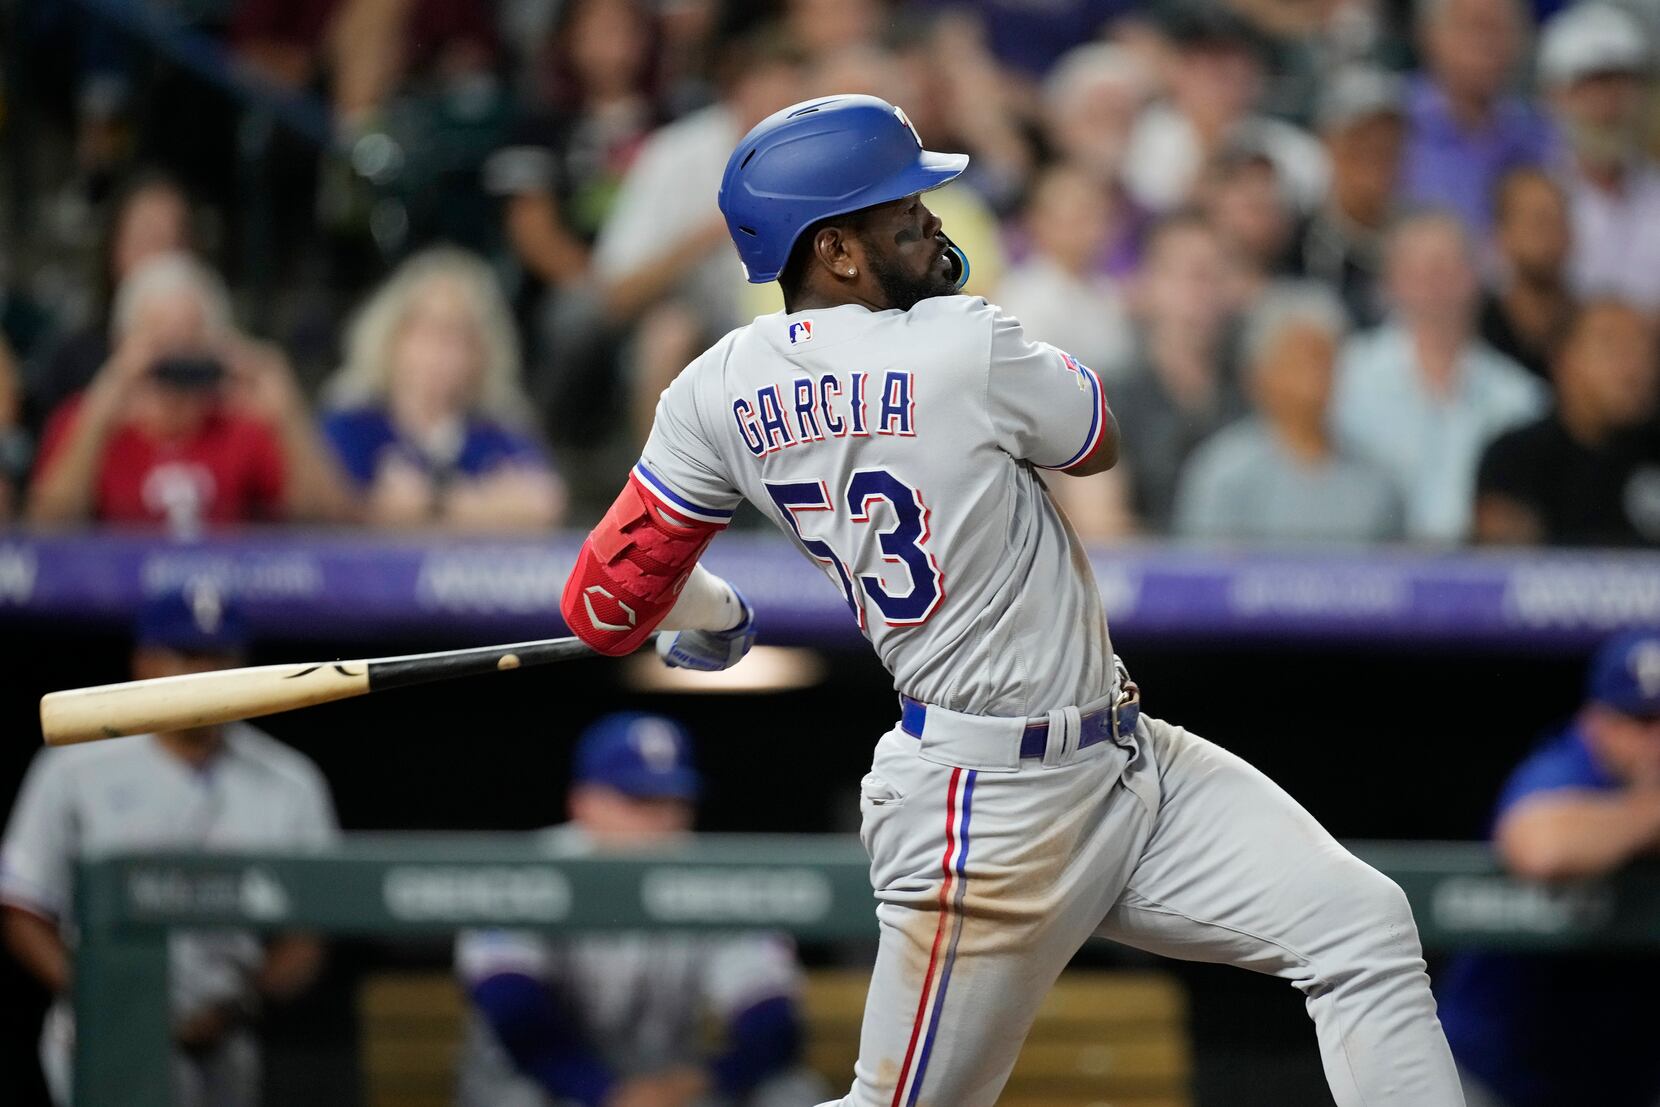 Garcia's hit streak ends at 23, Rangers fall to Tigers